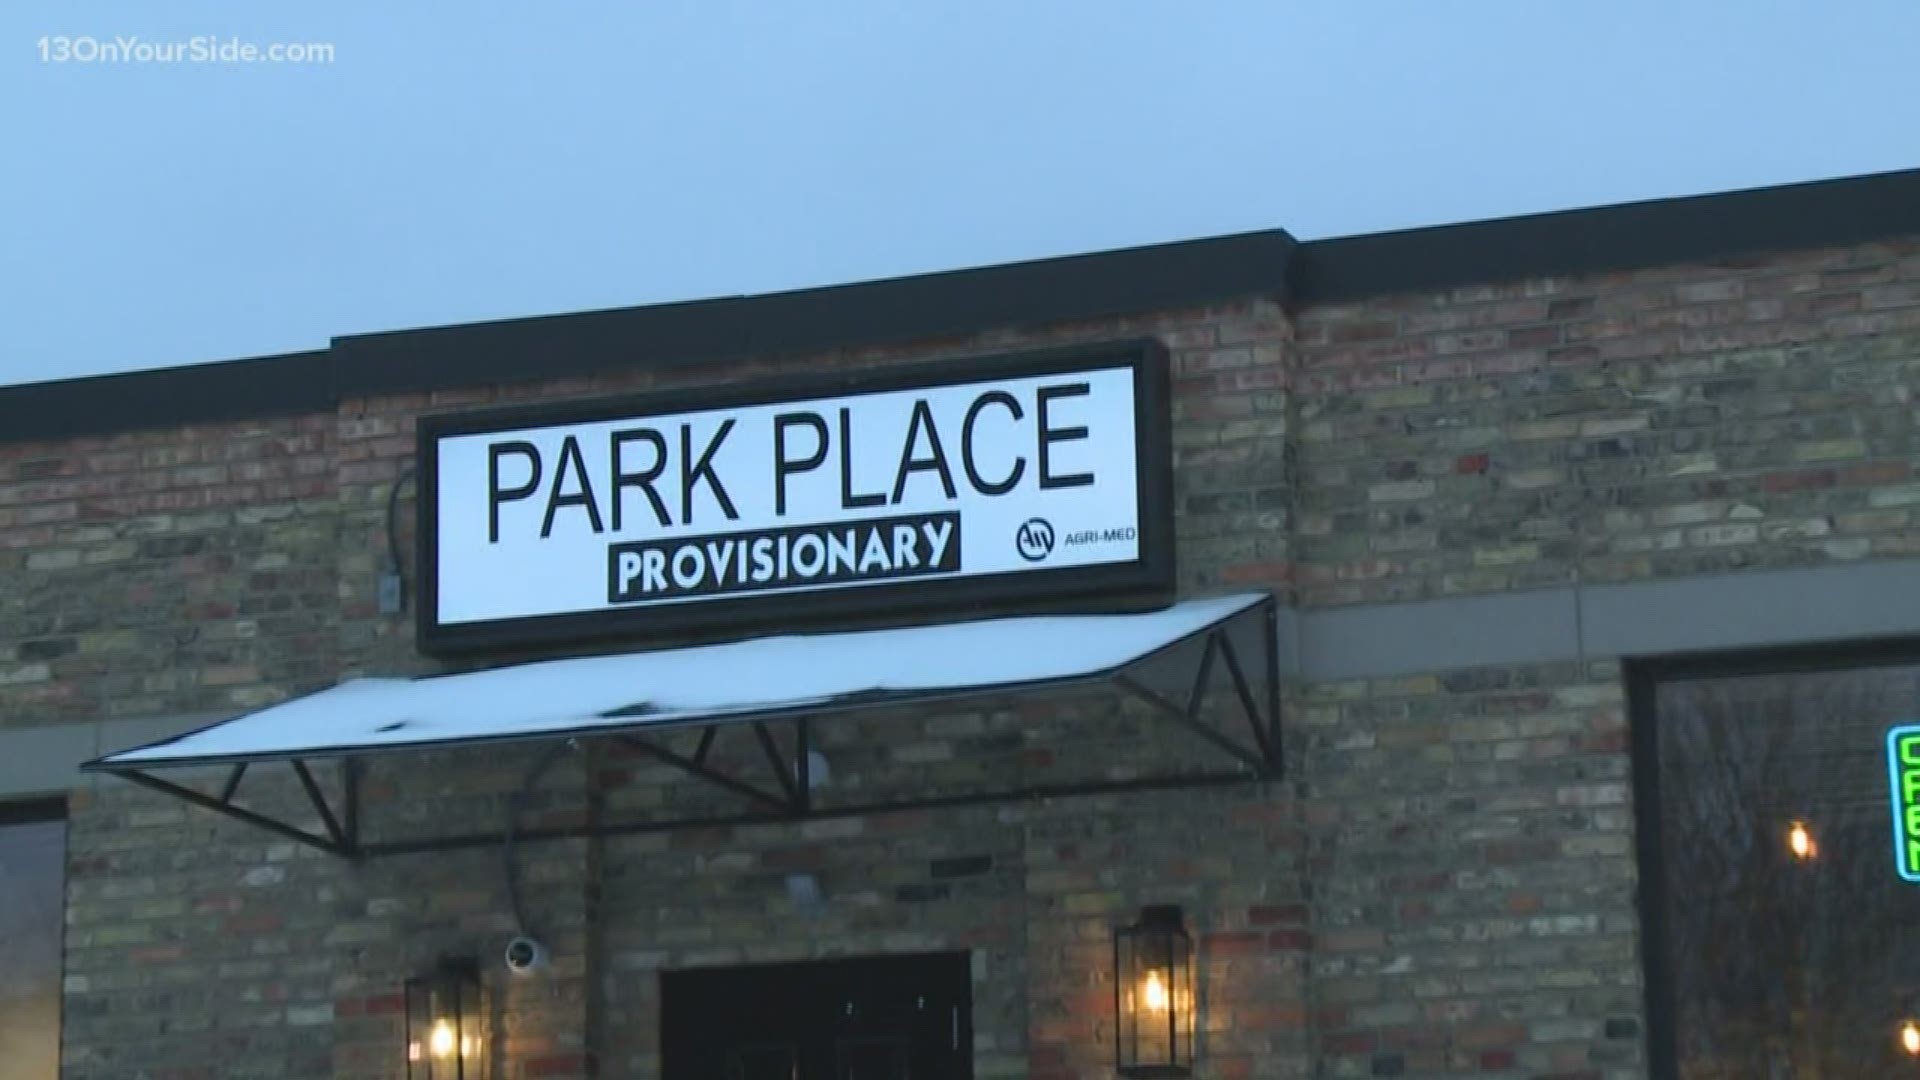 The owner of Park Place Provisionary said he's just days away from being first in the area to sell it.